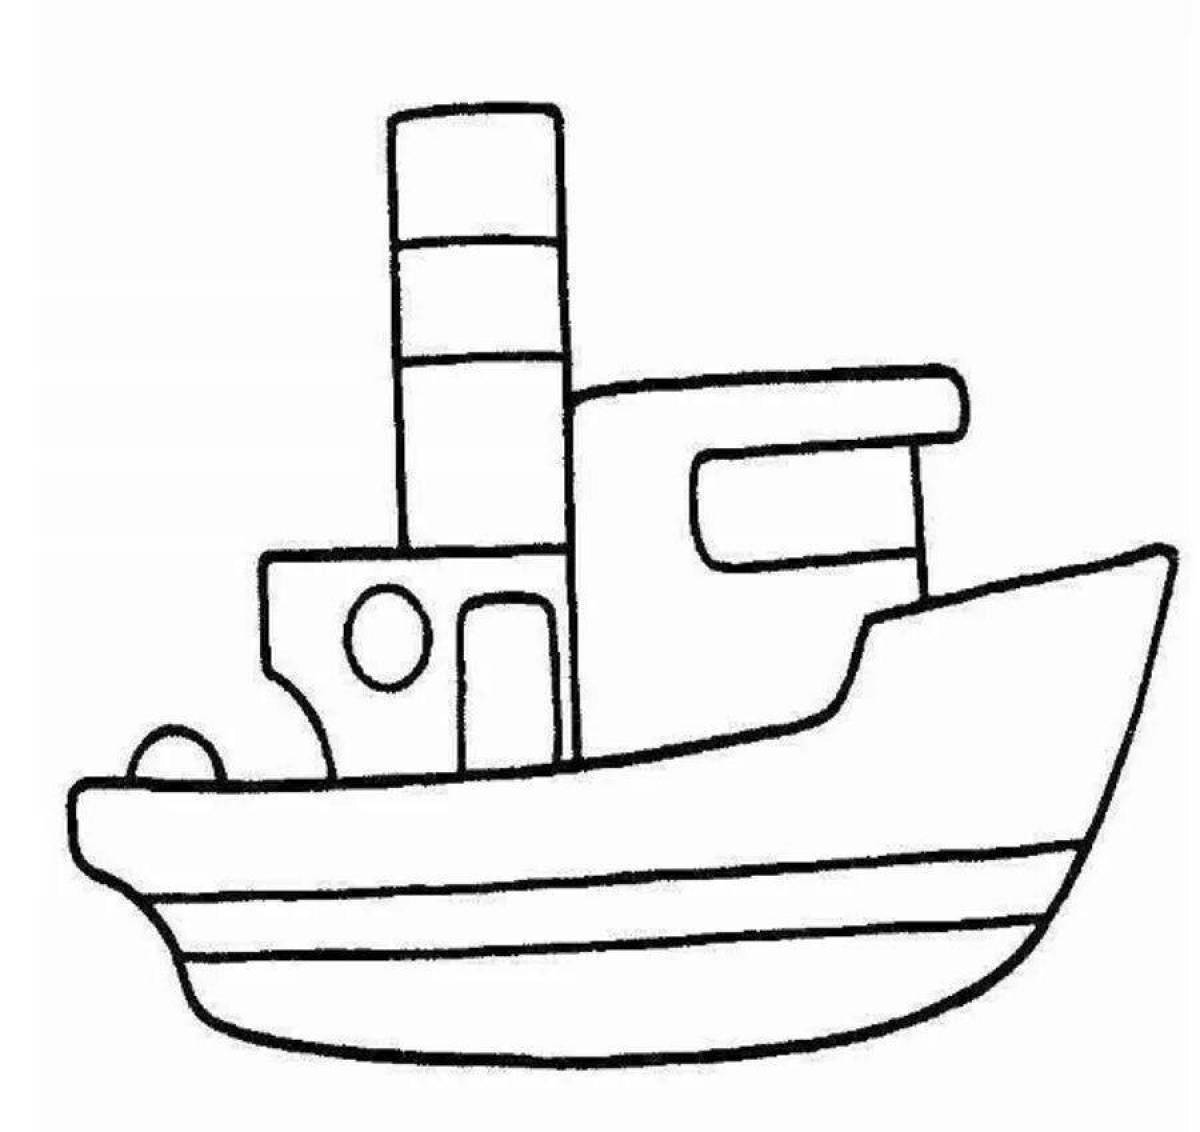 Coloring ship for children 3-4 years old